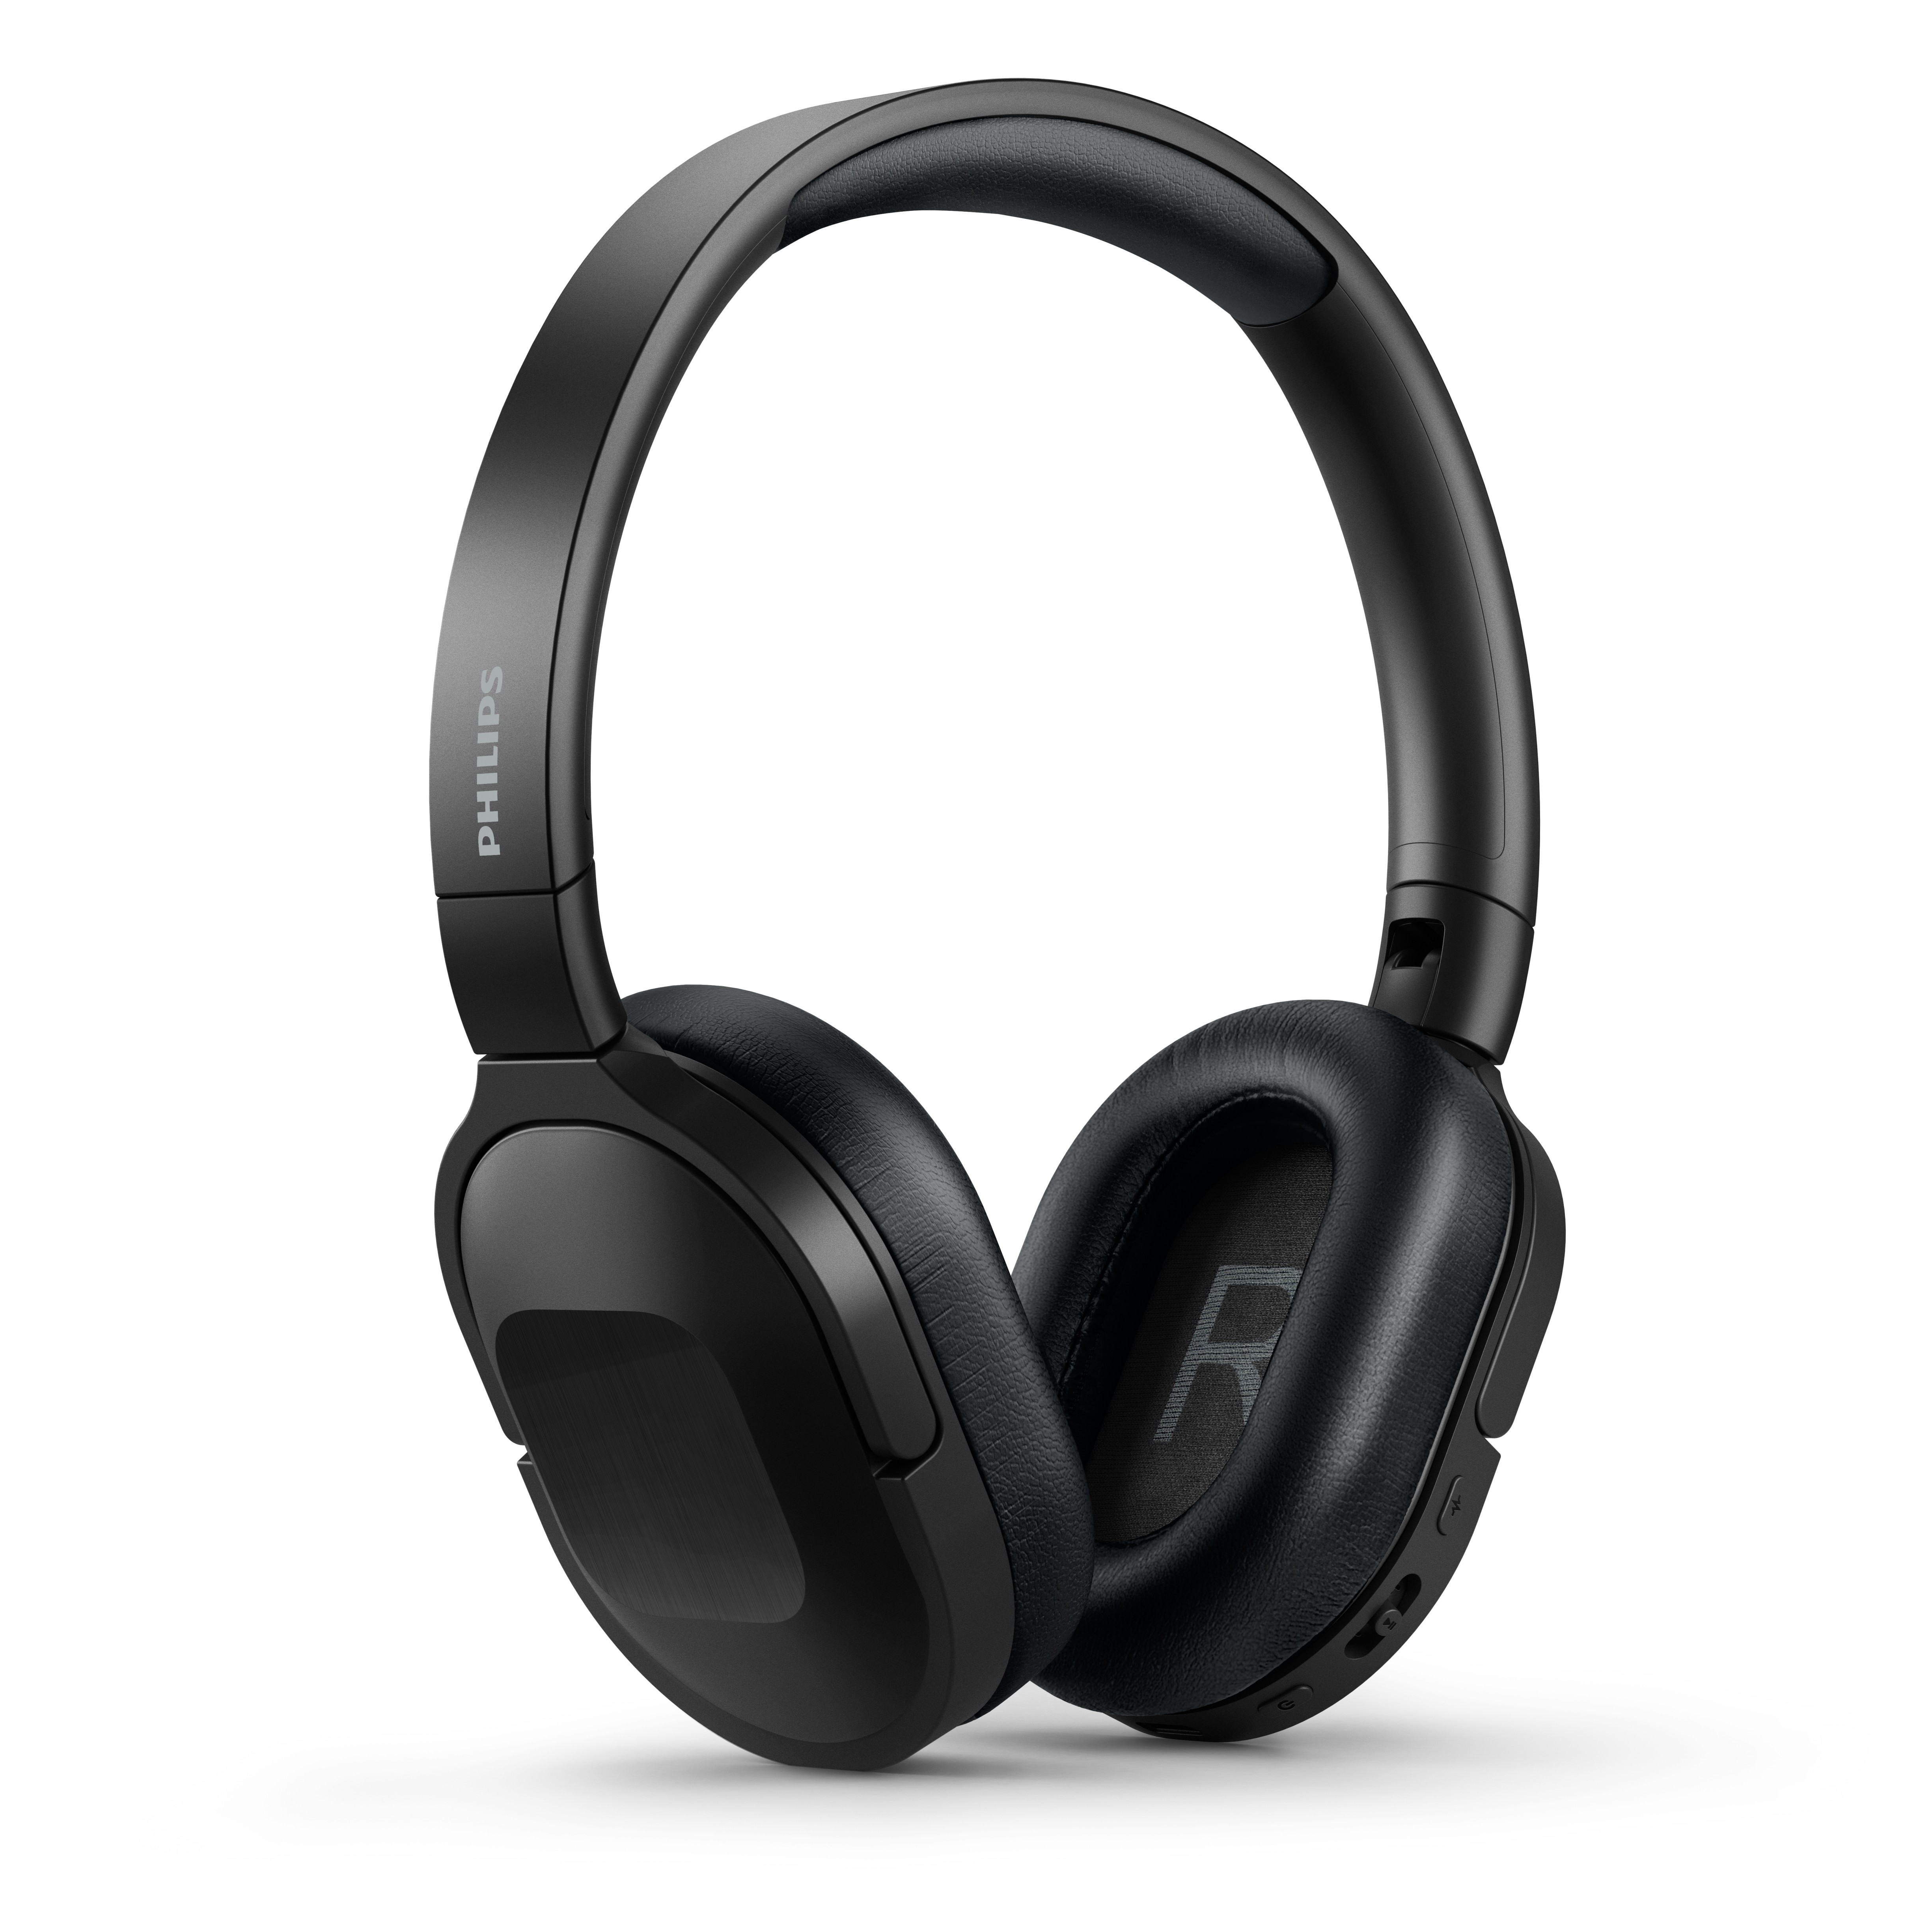 Travel light with the New Philips ANC headphones this holiday season